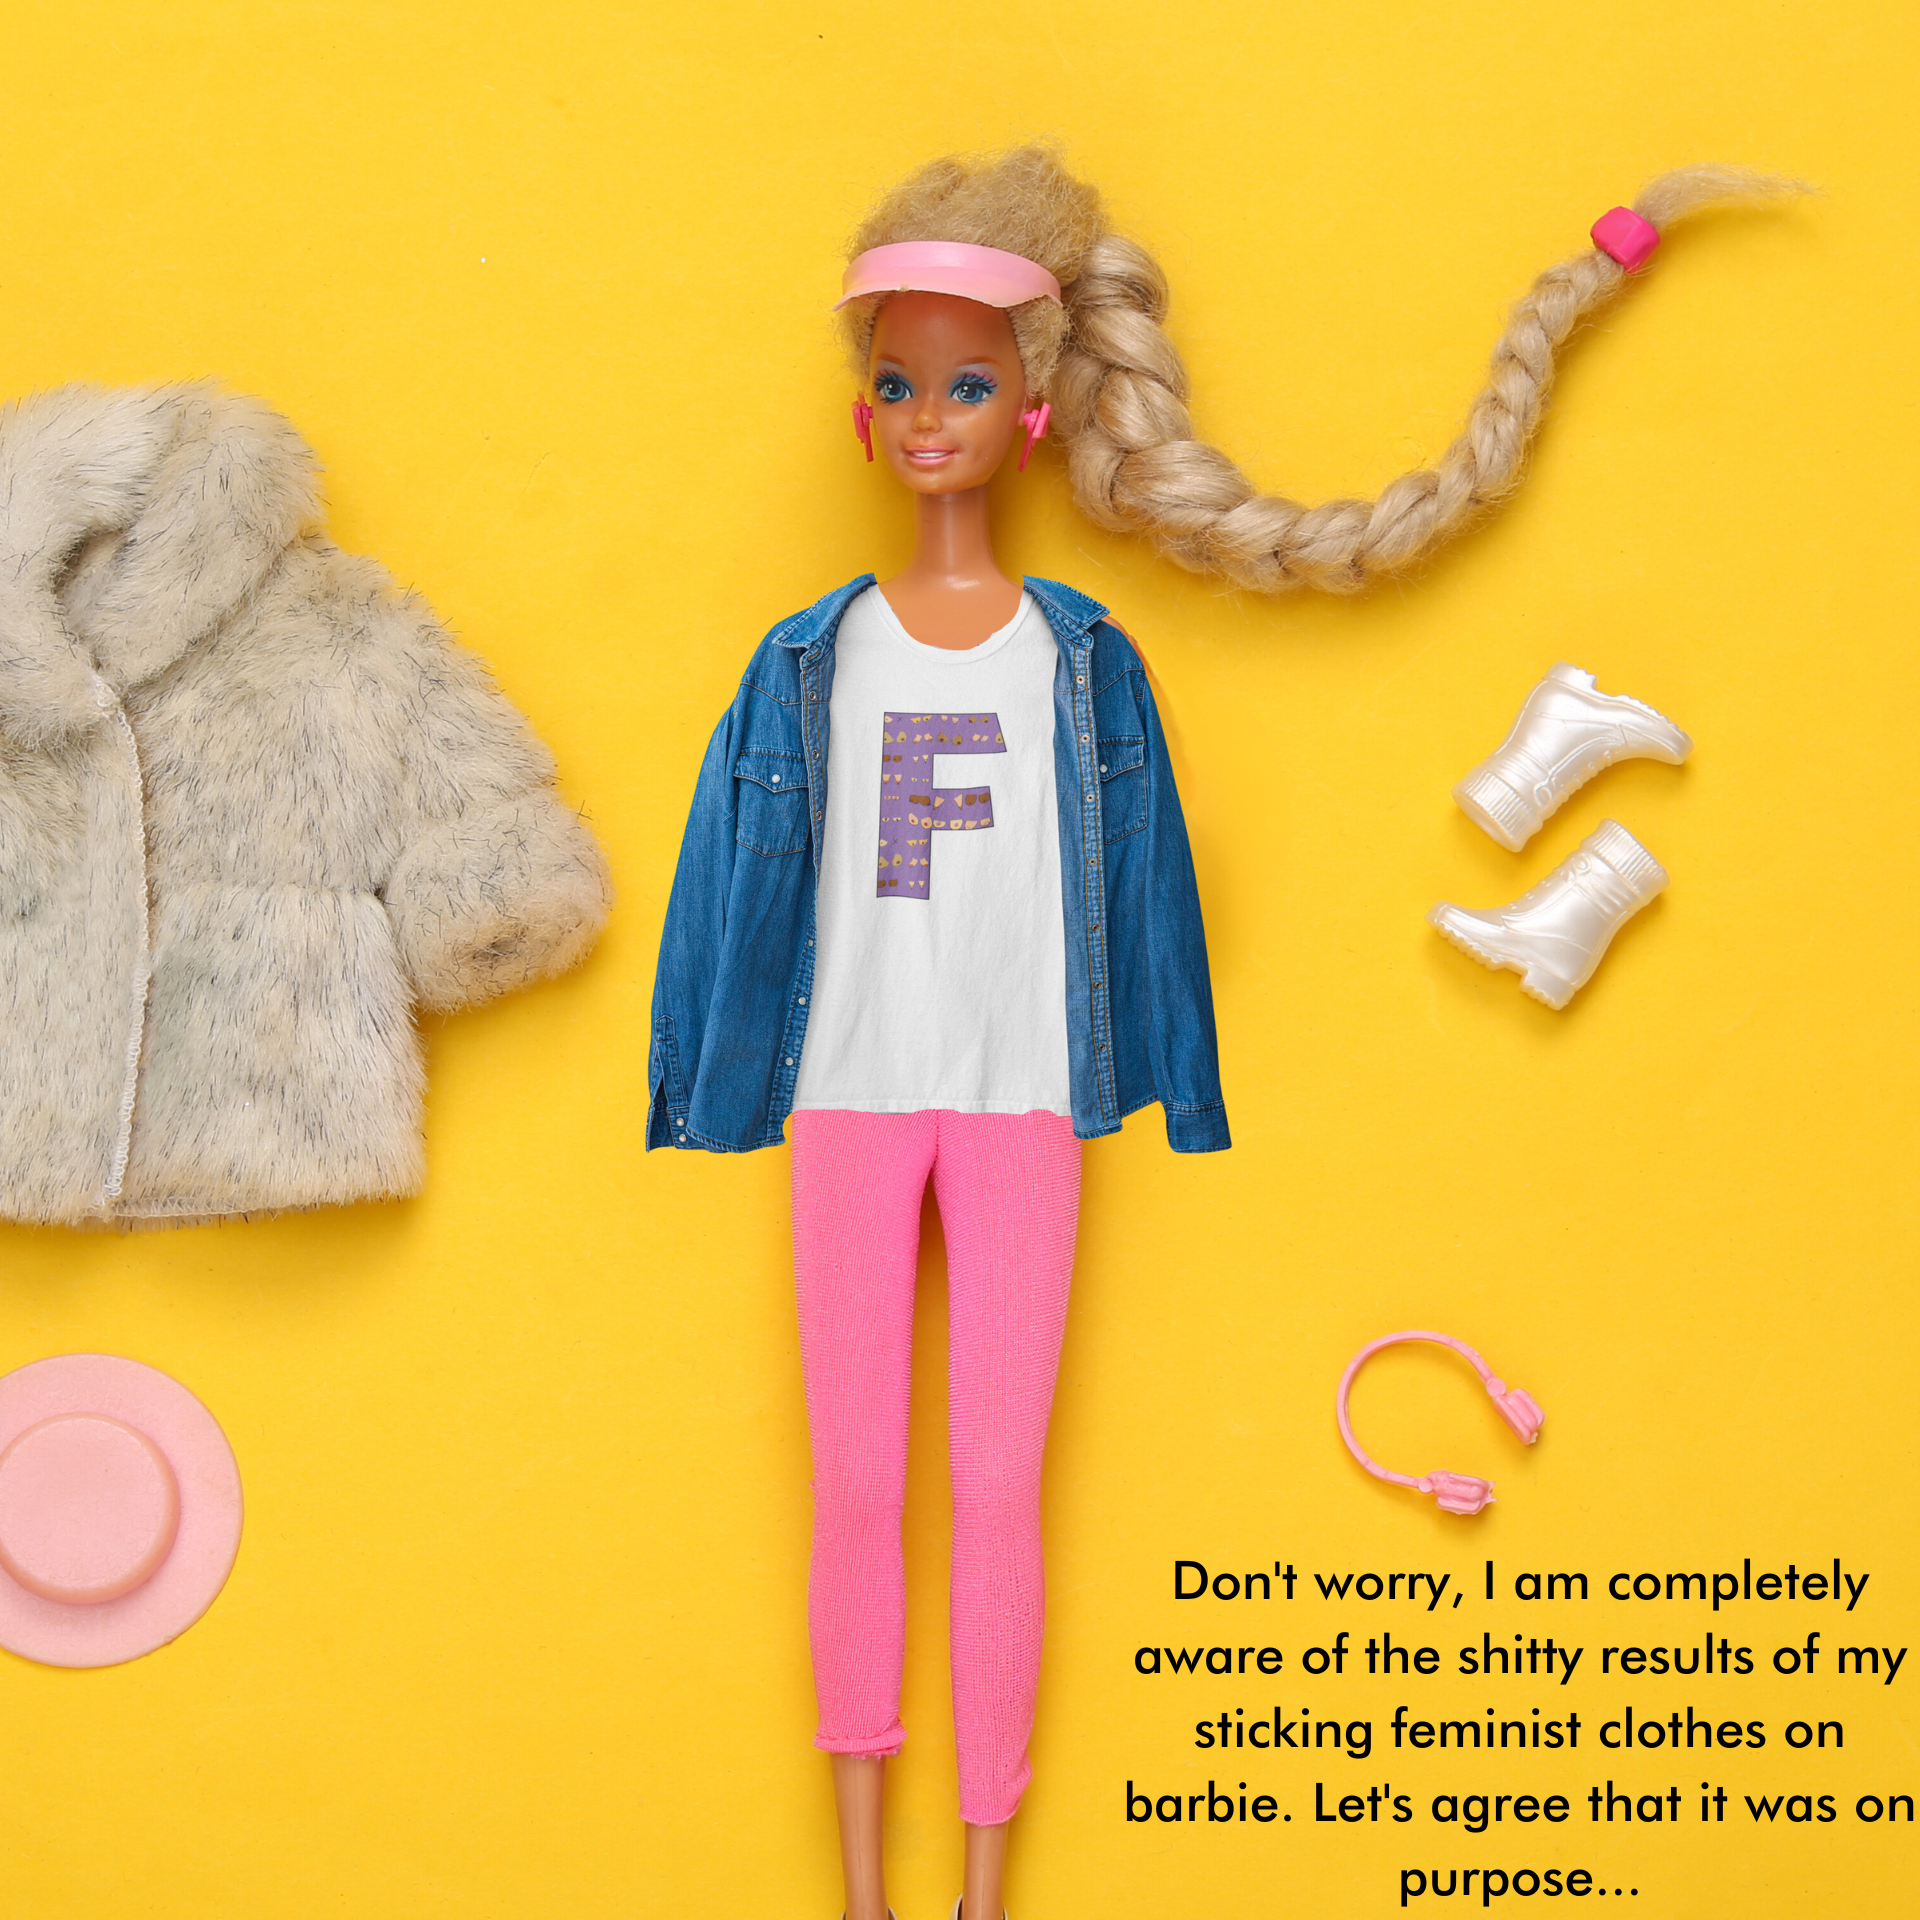 Interview - Barbie (if she were a feminist icon)